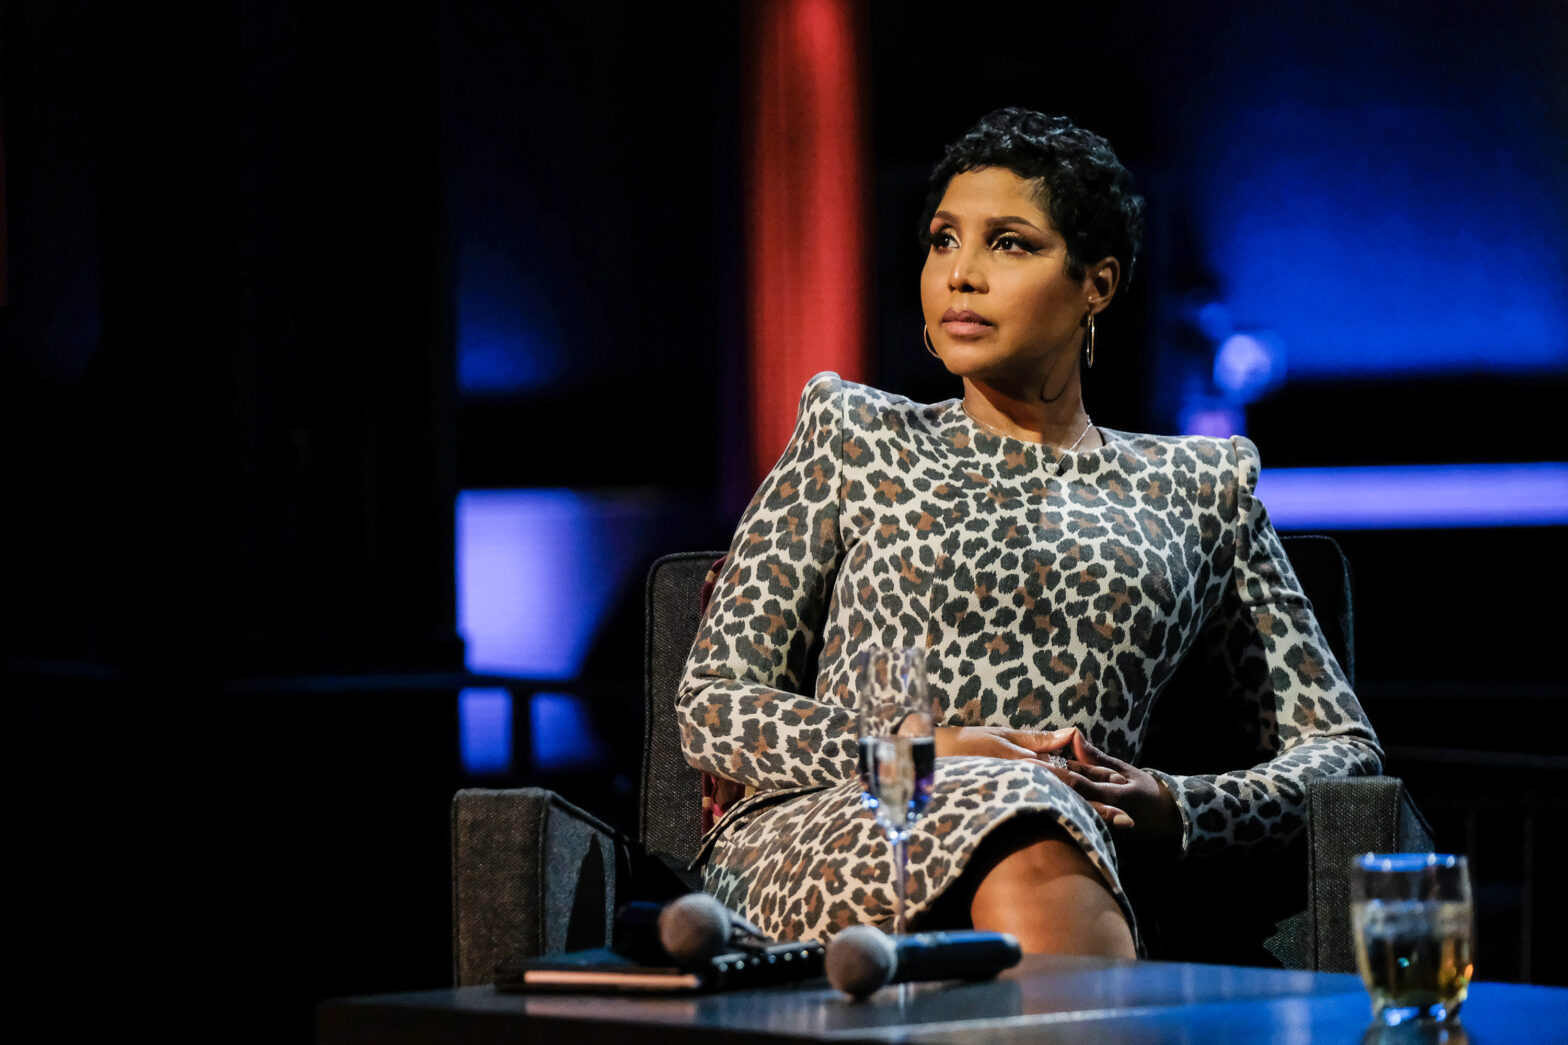 Toni Braxton’s Inspiring Story Ends With A $10 Million Net Worth